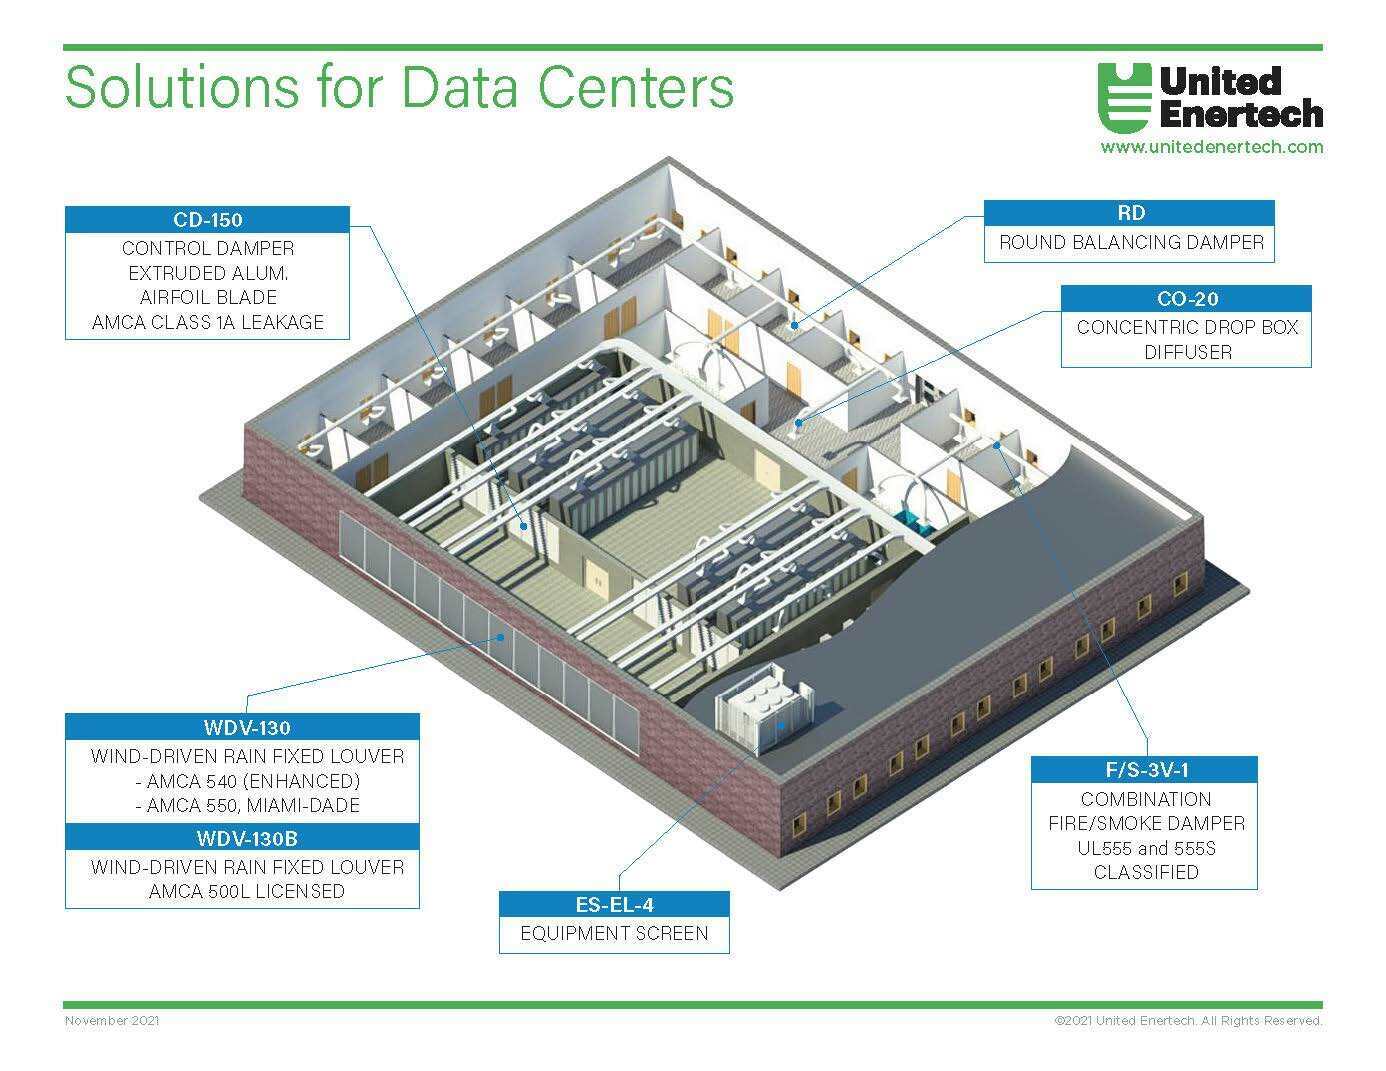 United Enertech Data Center Products